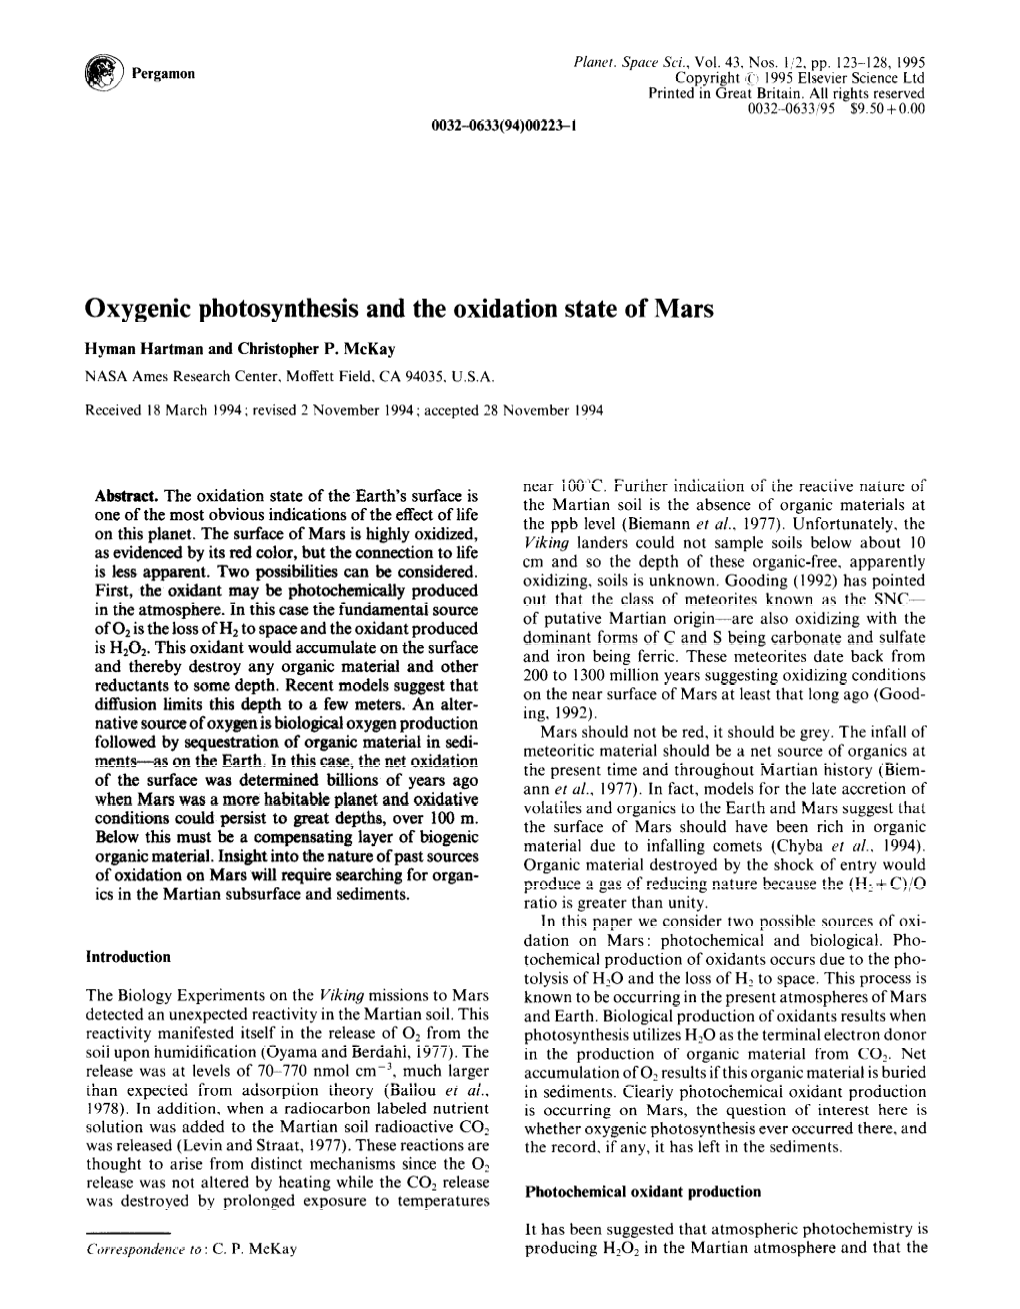 Oxygenic Photosynthesis and the Oxidation State of Mars